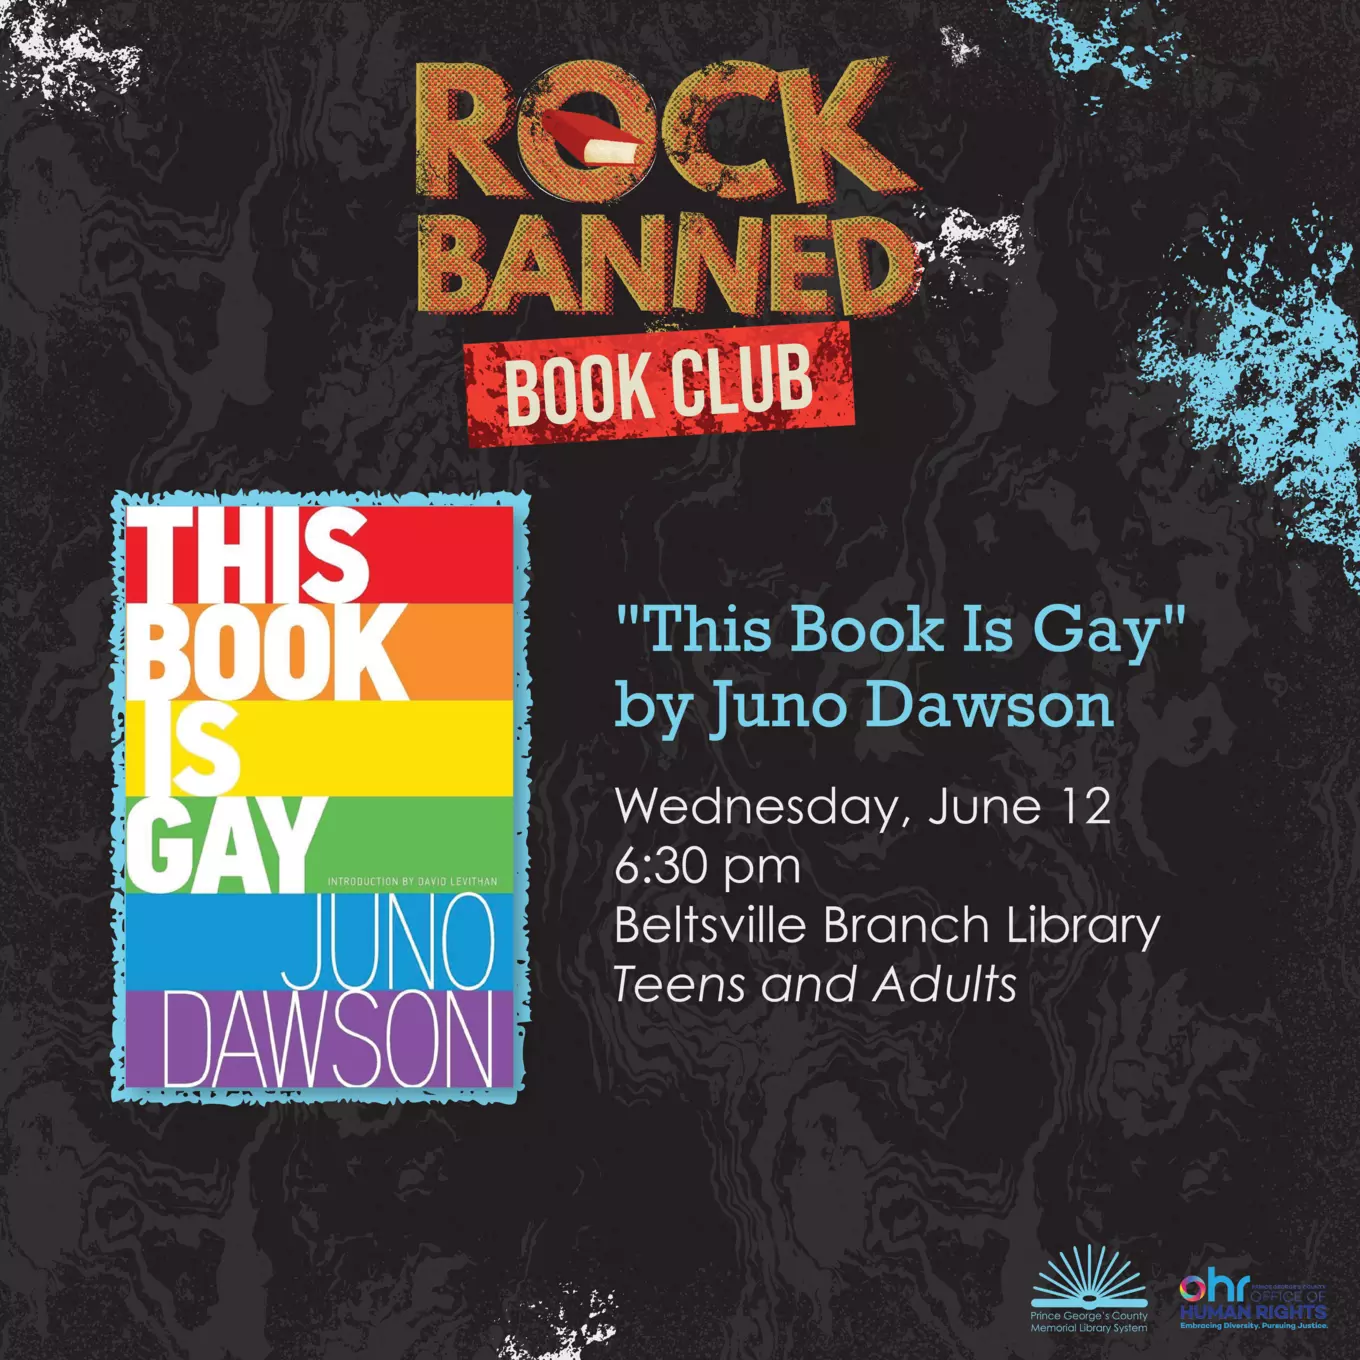 Rock Banned Book Club on This Book is Gay by Juno Dawson featuring book jacket image